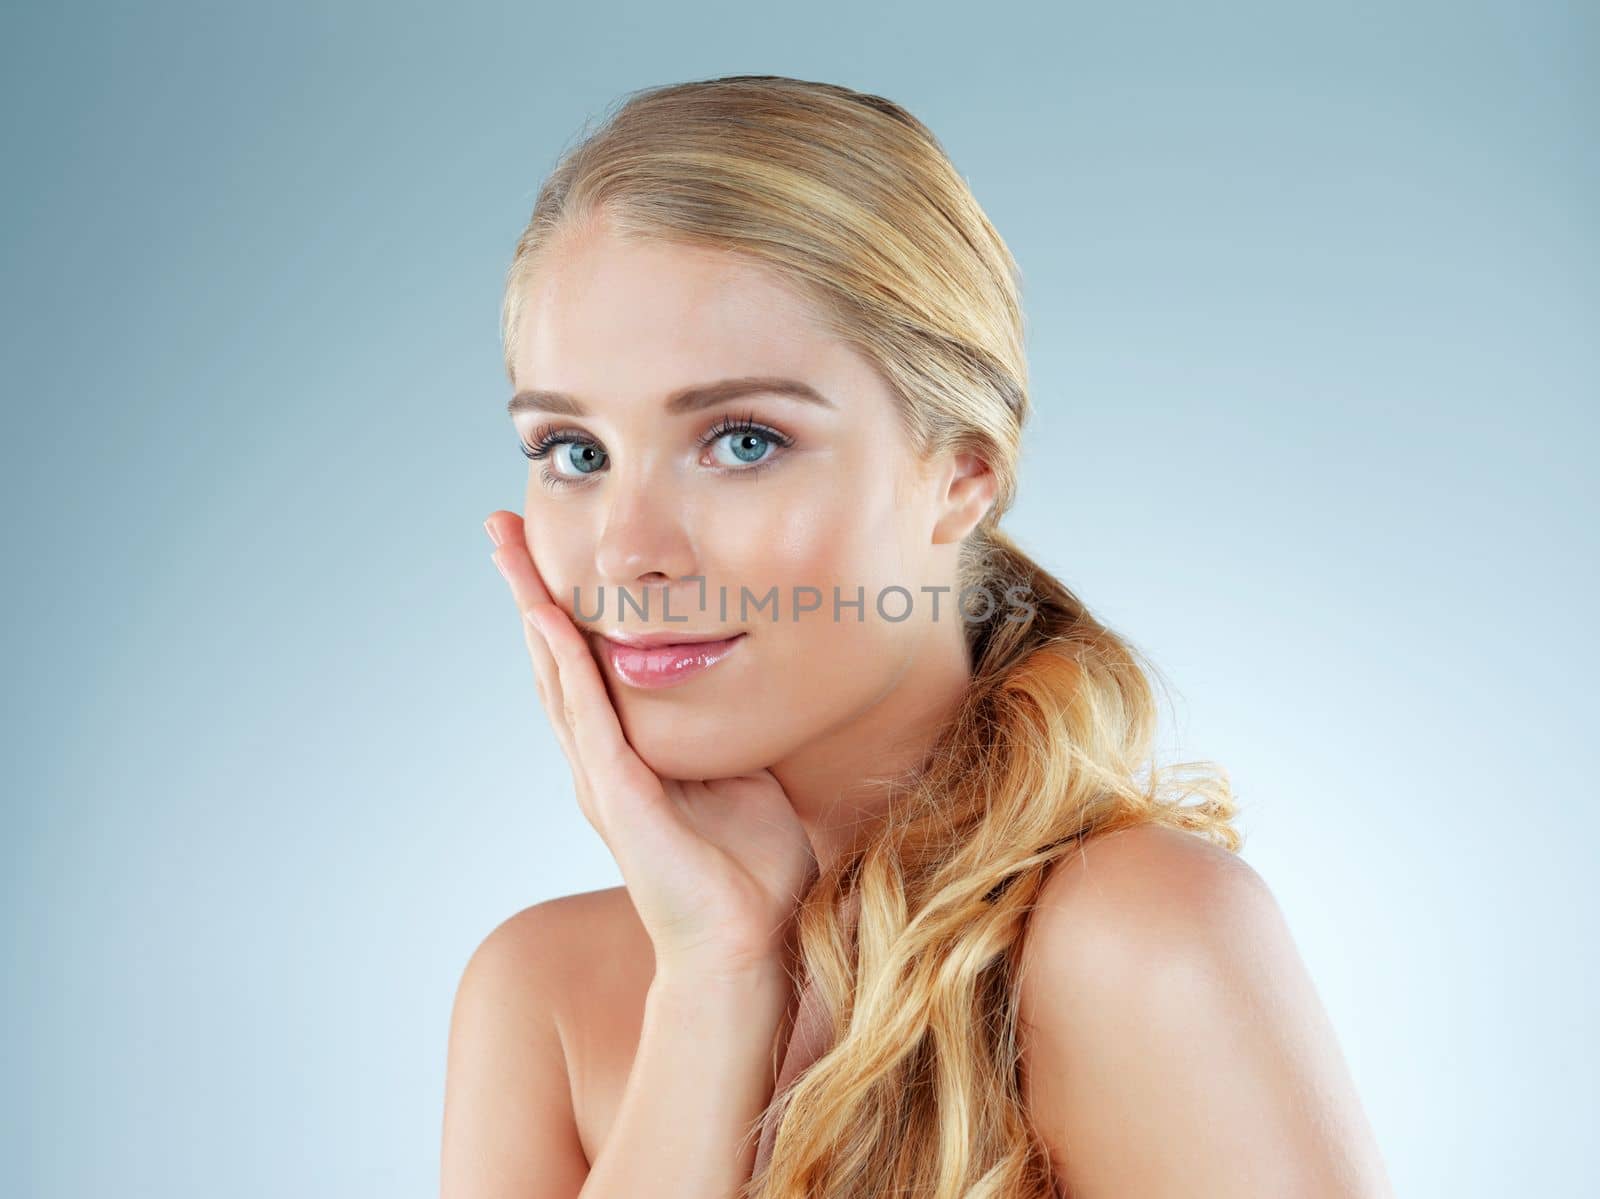 My skin feels amazing. Studio portrait of a beautiful young blonde woman posing against a blue background